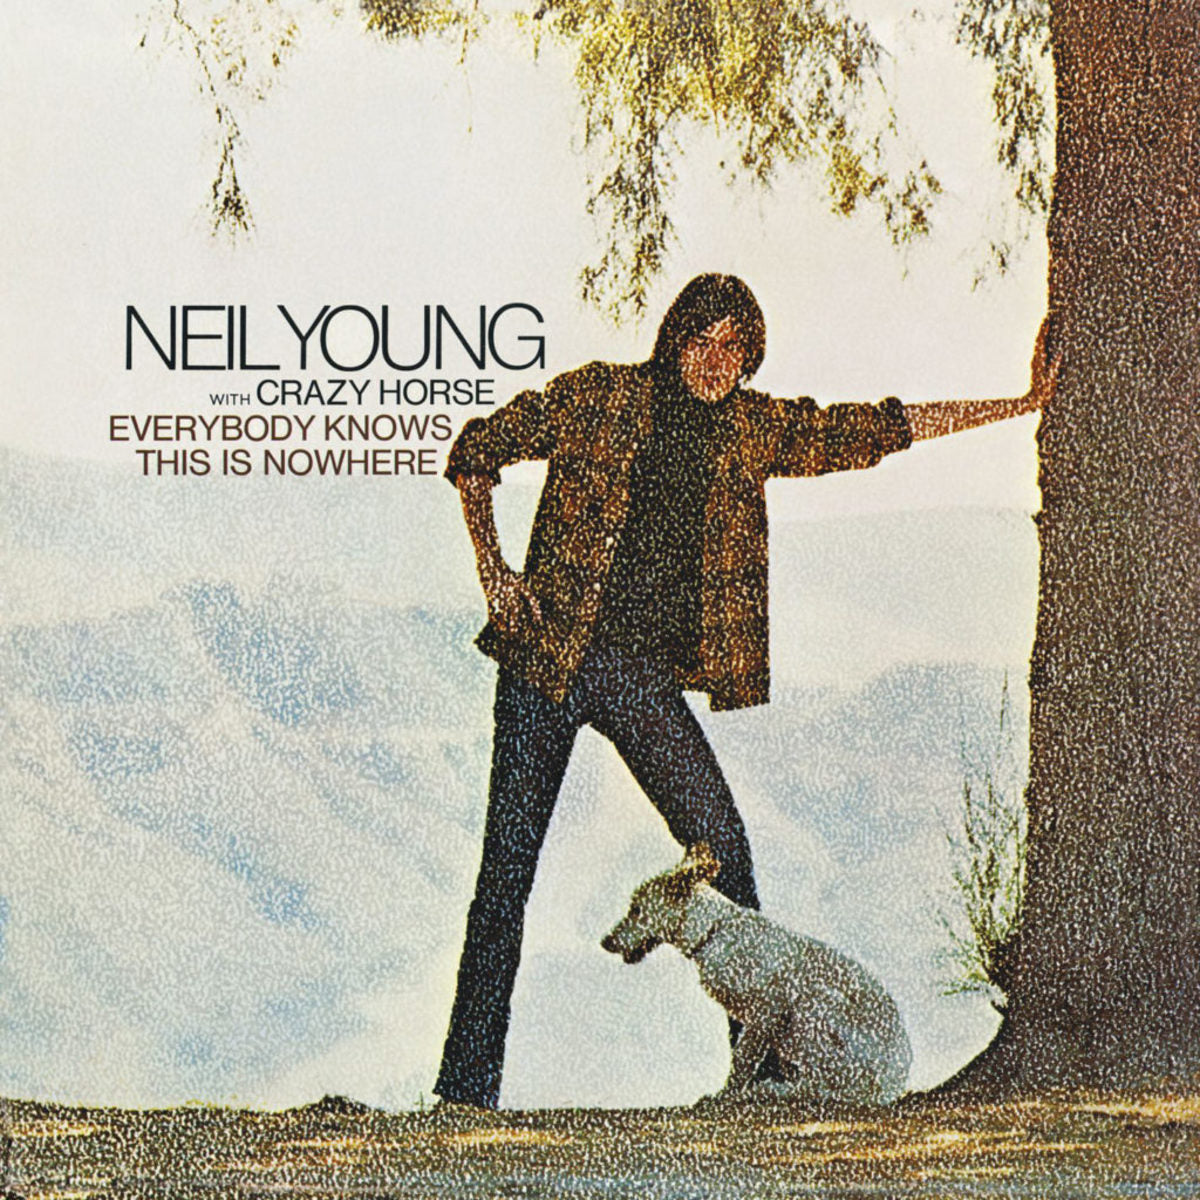 NEIL YOUNG WITH CRAZY HORSE - Everybody Knows This Is Nowhere - LP - Vinyl